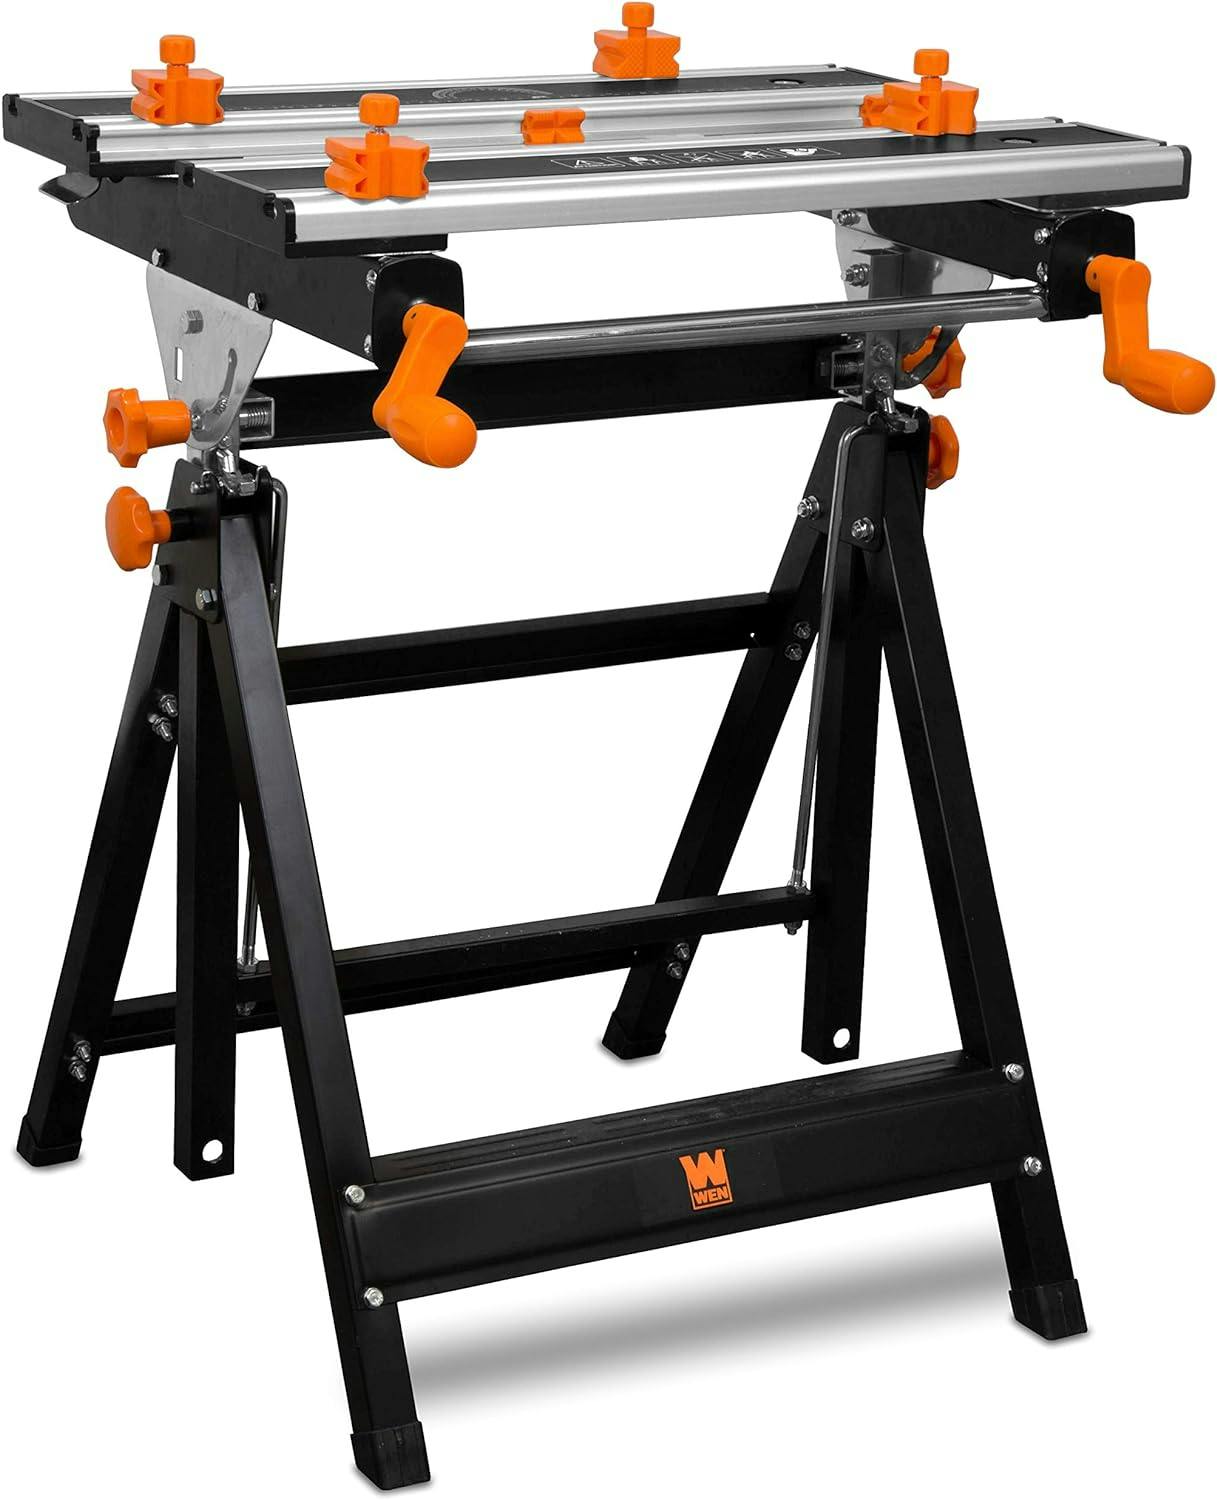 Adjustable Height Steel Portable Workbench with Sliding Clamps